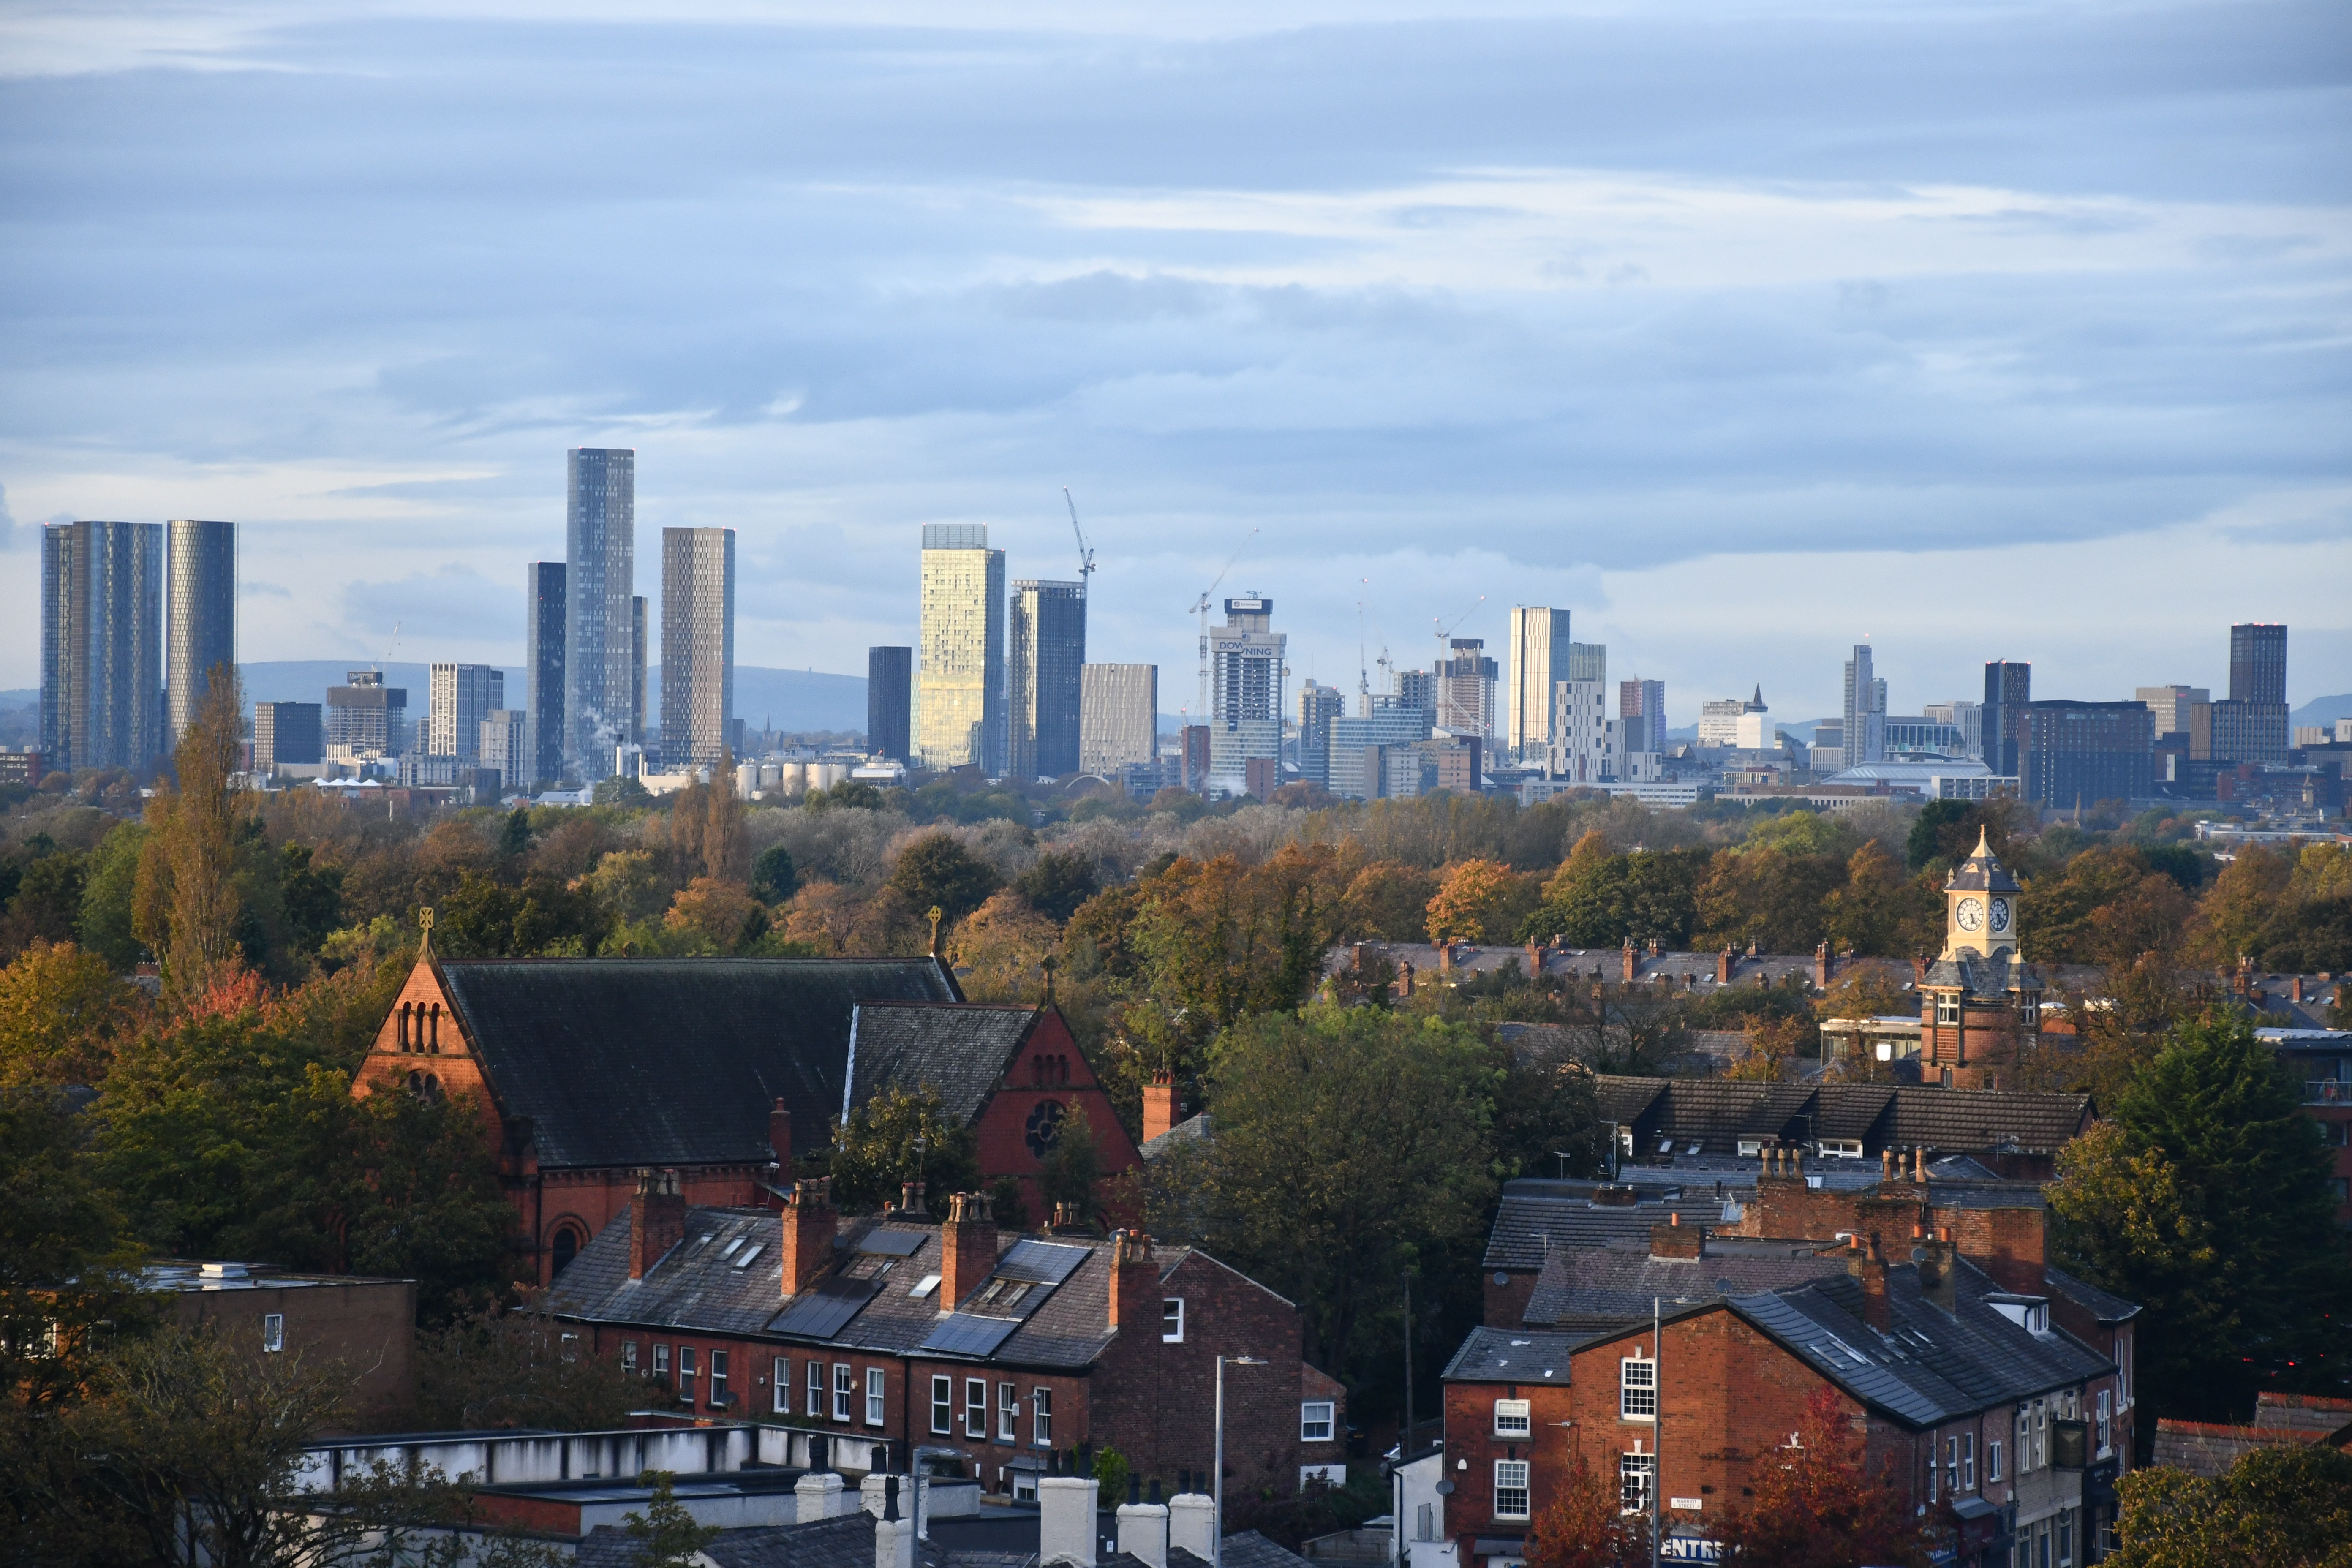 A view of Withington from the Paterson Building, looking towards the city centre of Manchester